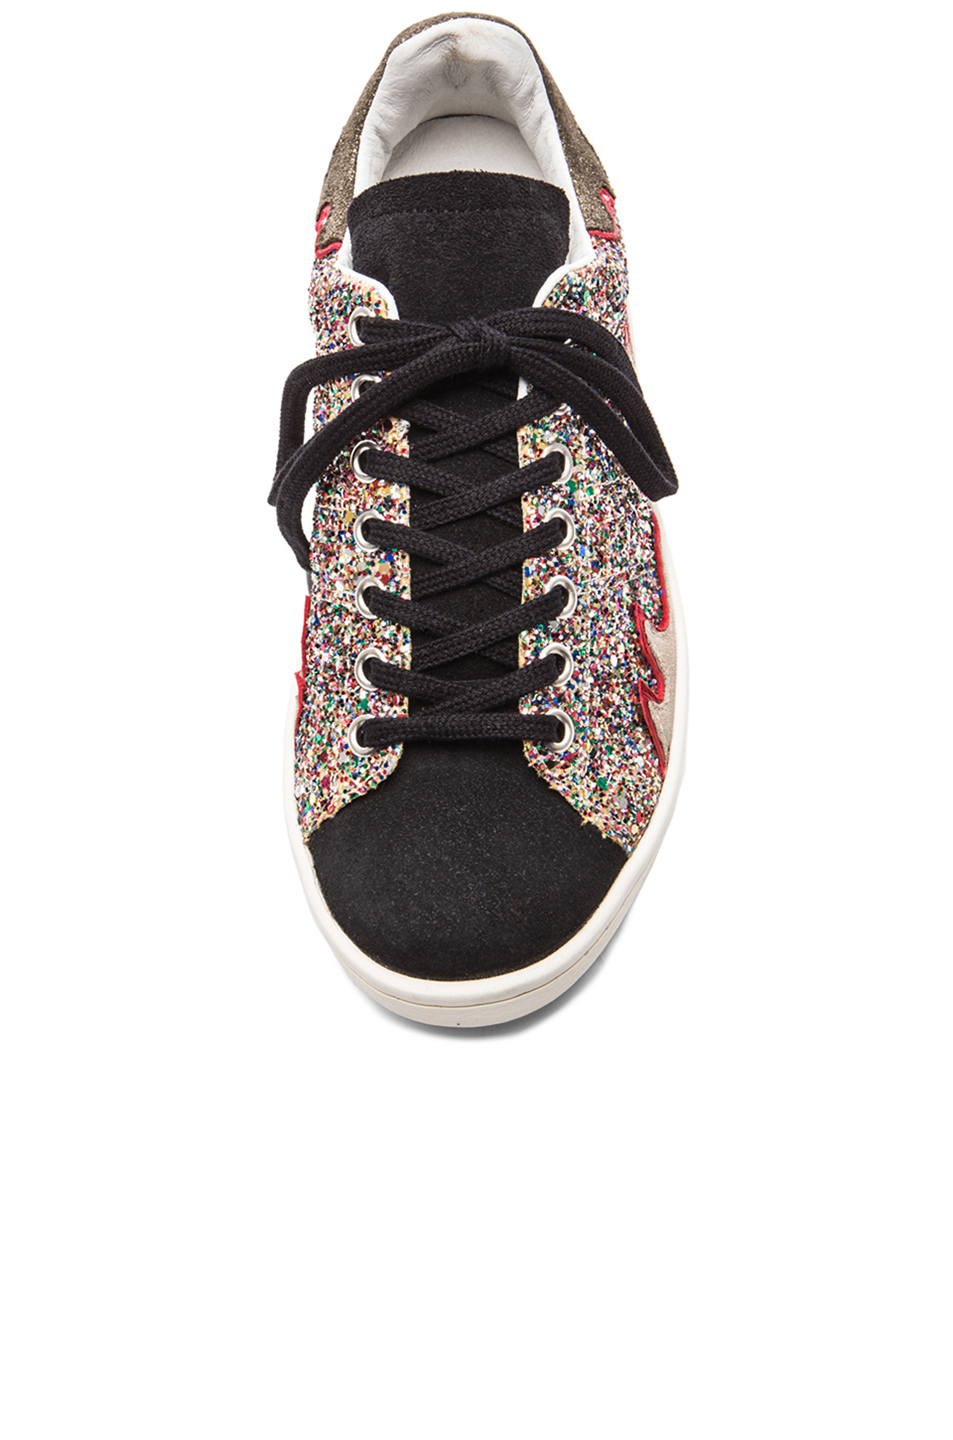 Marant Leather Gilly Sneakers -